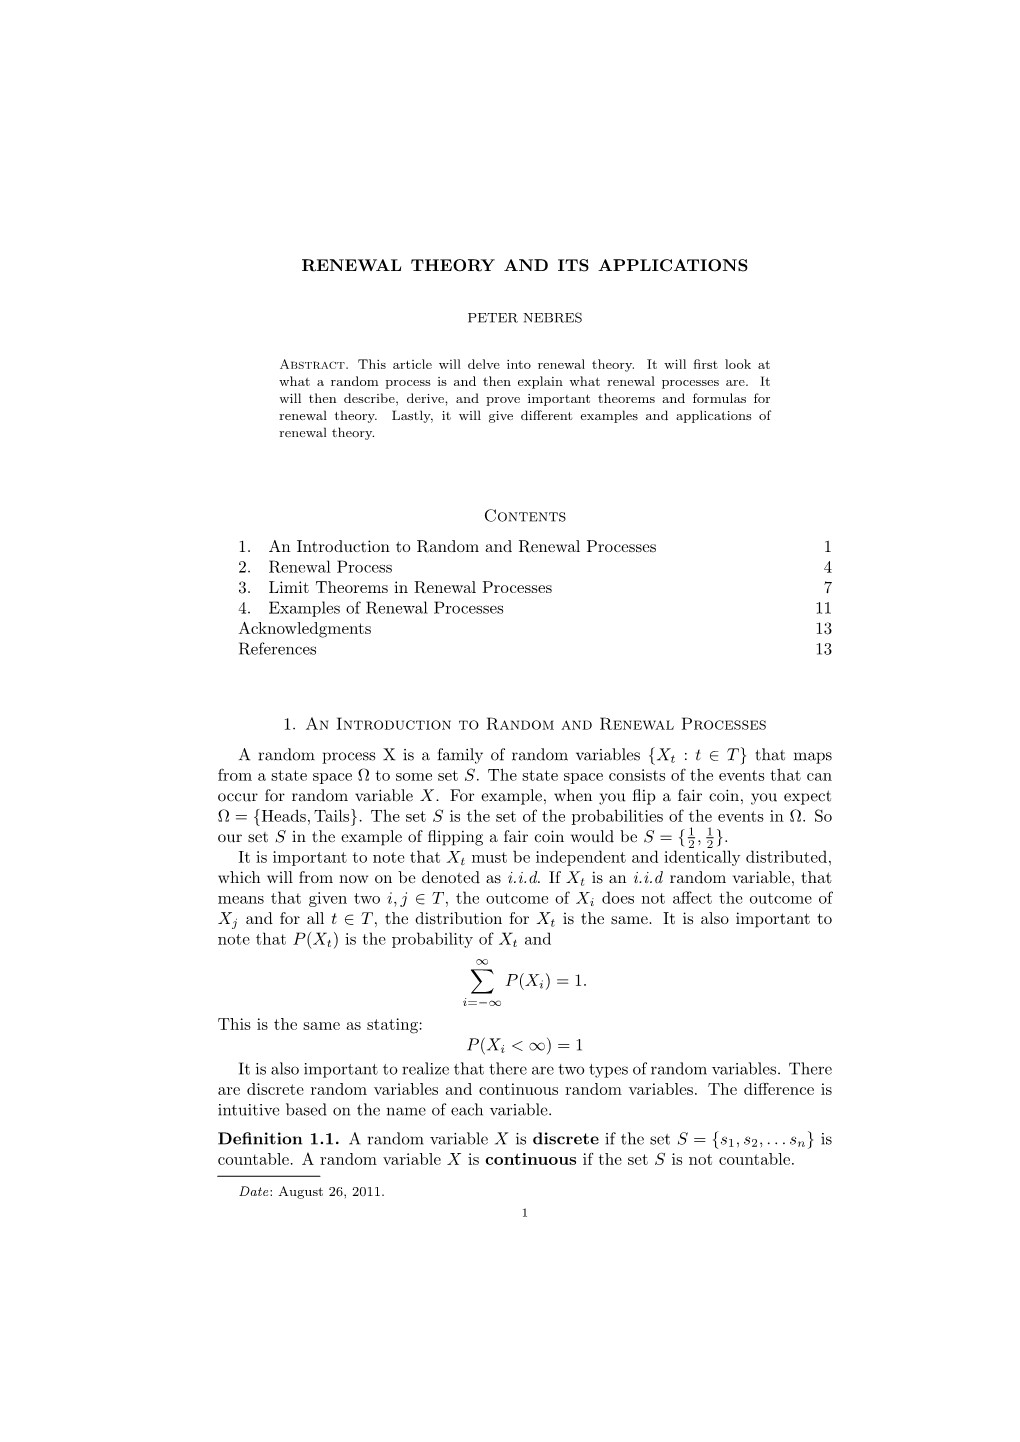 RENEWAL THEORY and ITS APPLICATIONS Contents 1. An